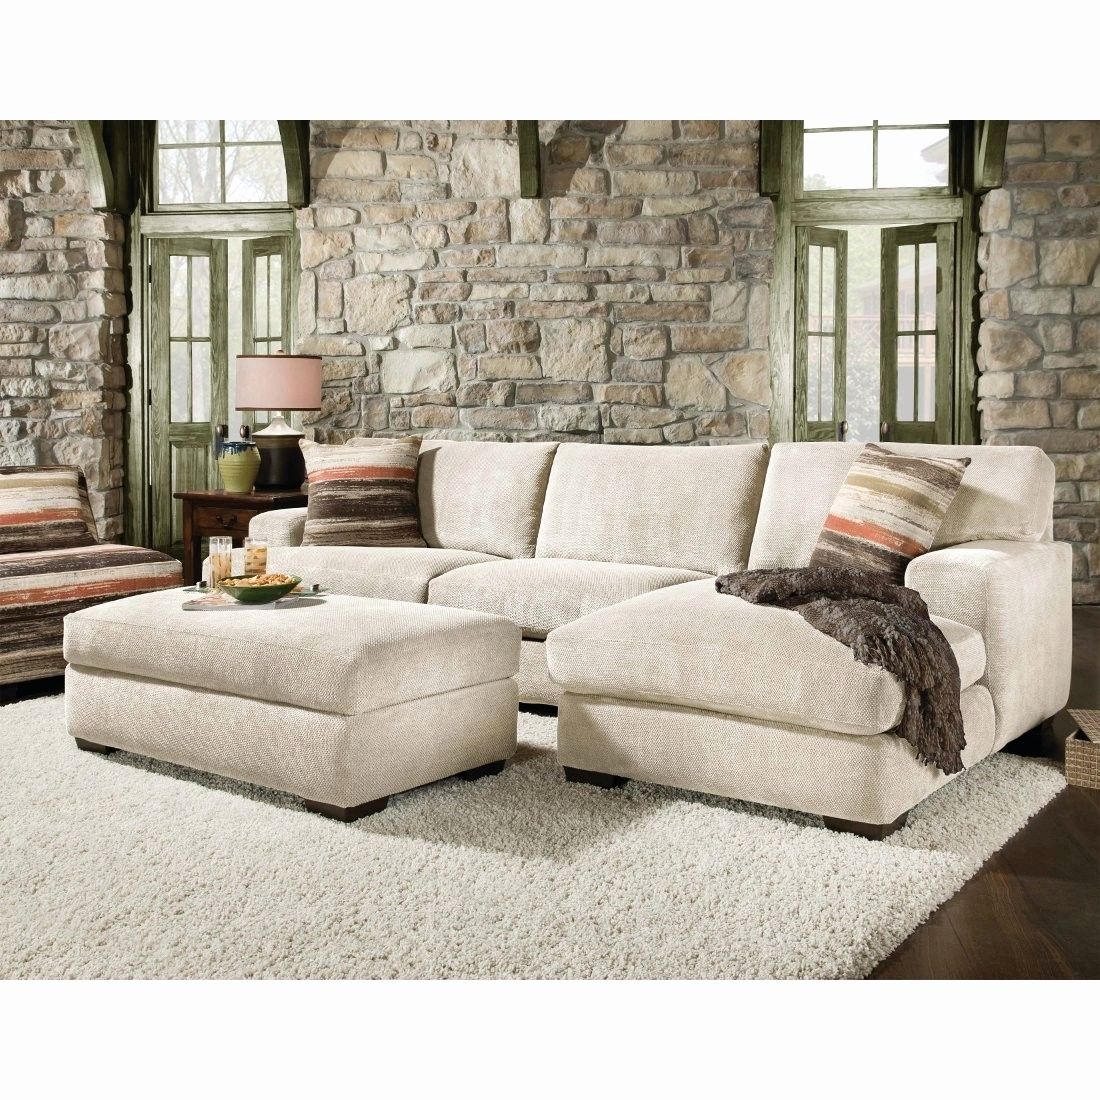 Conns Furniture El Paso Lovely Corinthian Mead Sectional Sofa Piece Throughout El Paso Sectional Sofas (View 8 of 10)